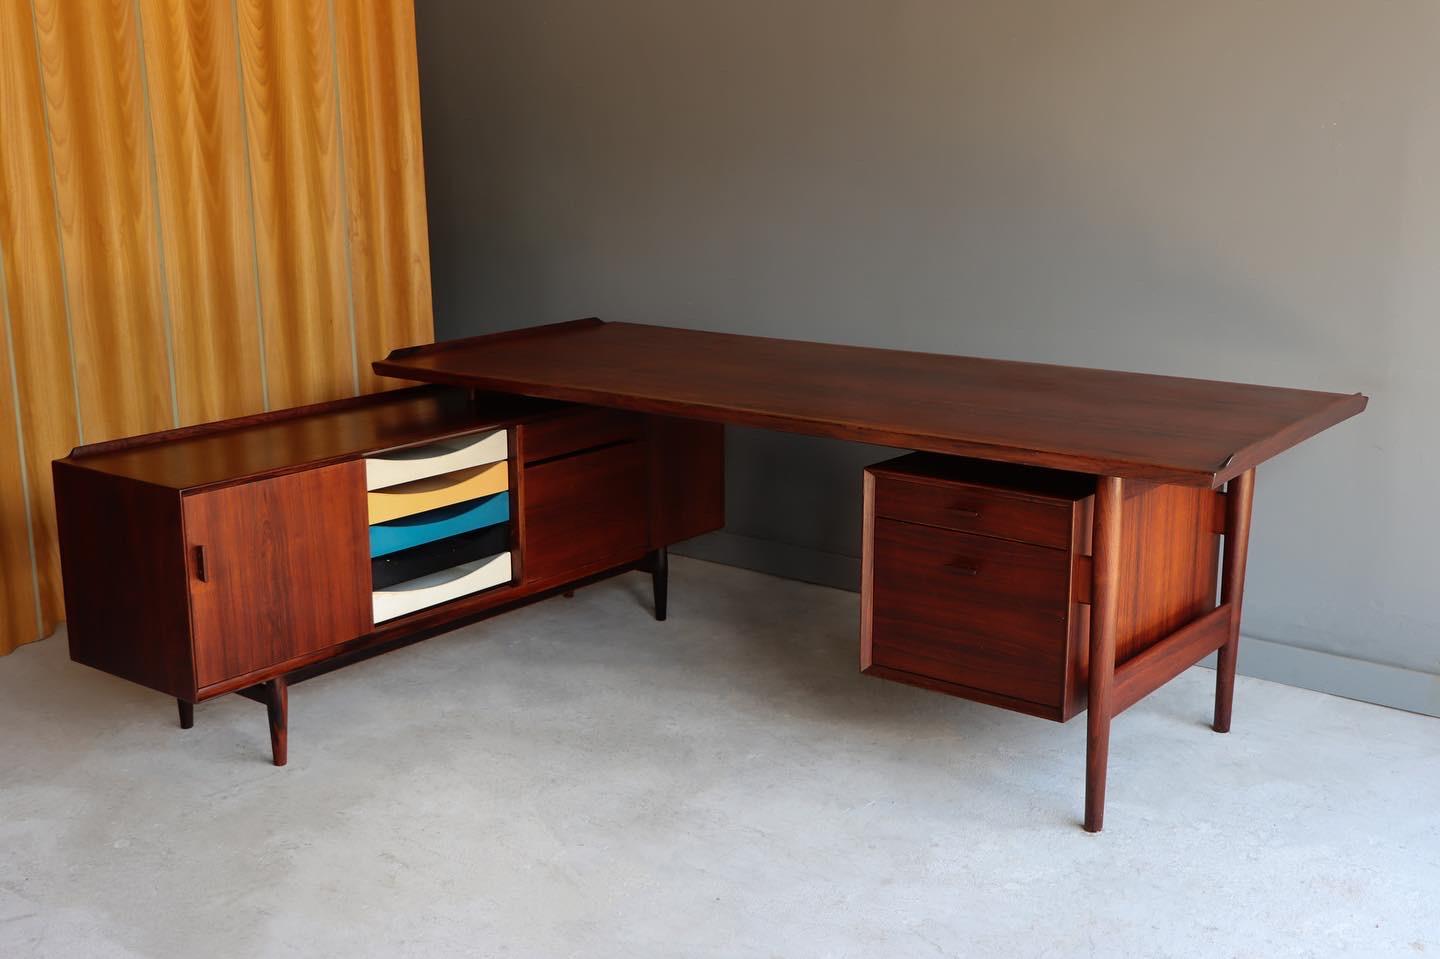 Stunning desk and integrated sideboard - Designed by Arne Vodder and produced by Sibast Møbelfabrik - Denmark c. 1955. This beautiful design is made completely of the finest Brazilian rosewood and still retains it’s beautiful coloring and graining.